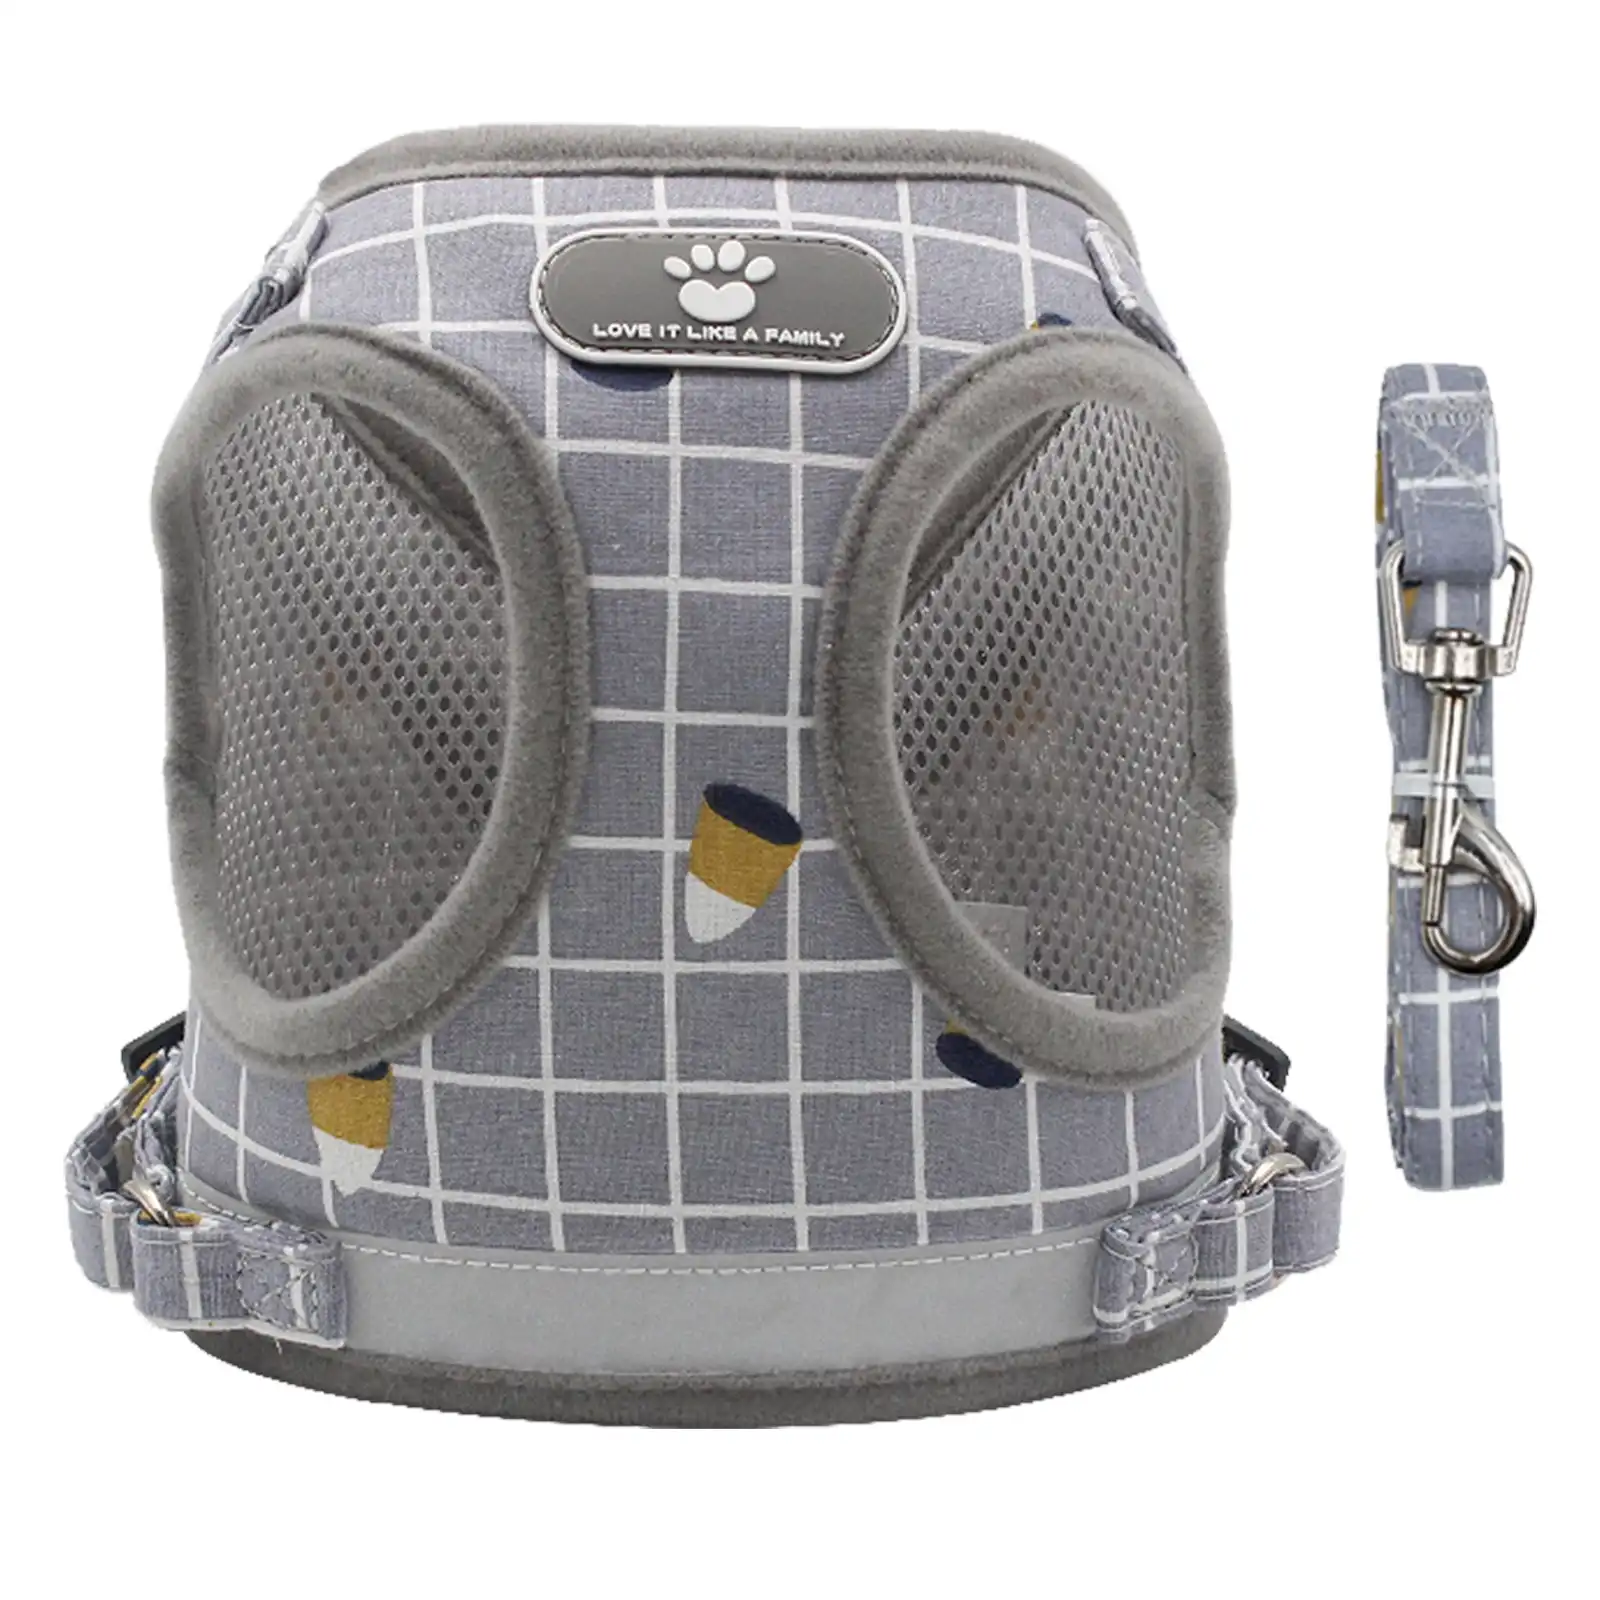 Furbulous No Pull Cat Small Dog Harness and Lead Set Adjustable Reflective Step-in Vest Harnesses Mesh Padded Plaid Escape Proof Puppy Jacket - Grey L